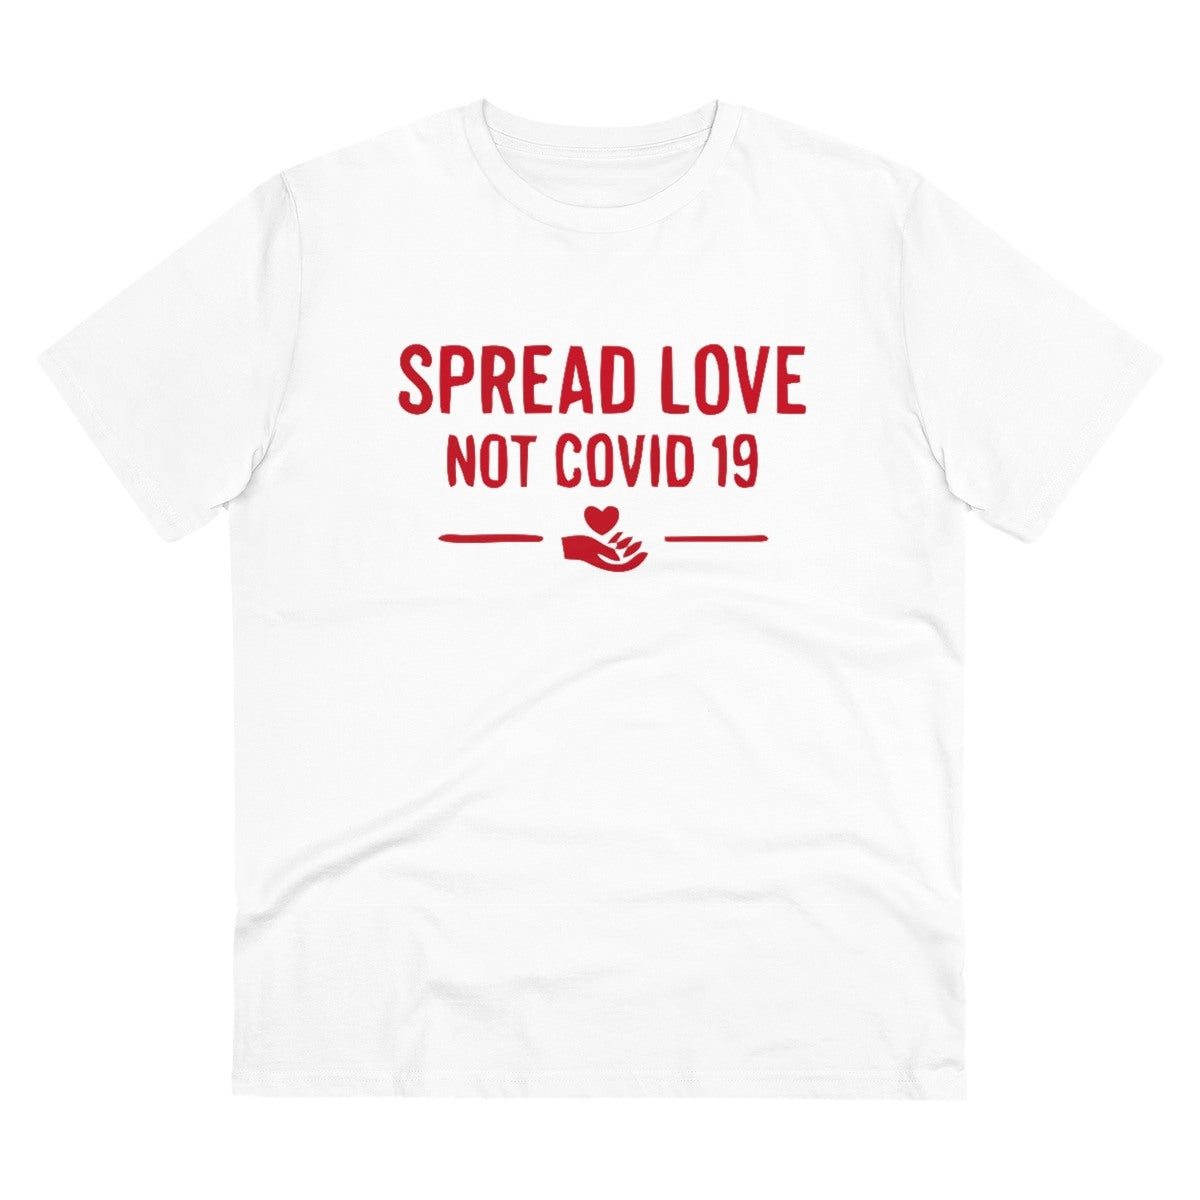 Men's PC Cotton Spread Love Not Covid 19 Printed T Shirt (Color: White, Thread Count: 180GSM) - GillKart